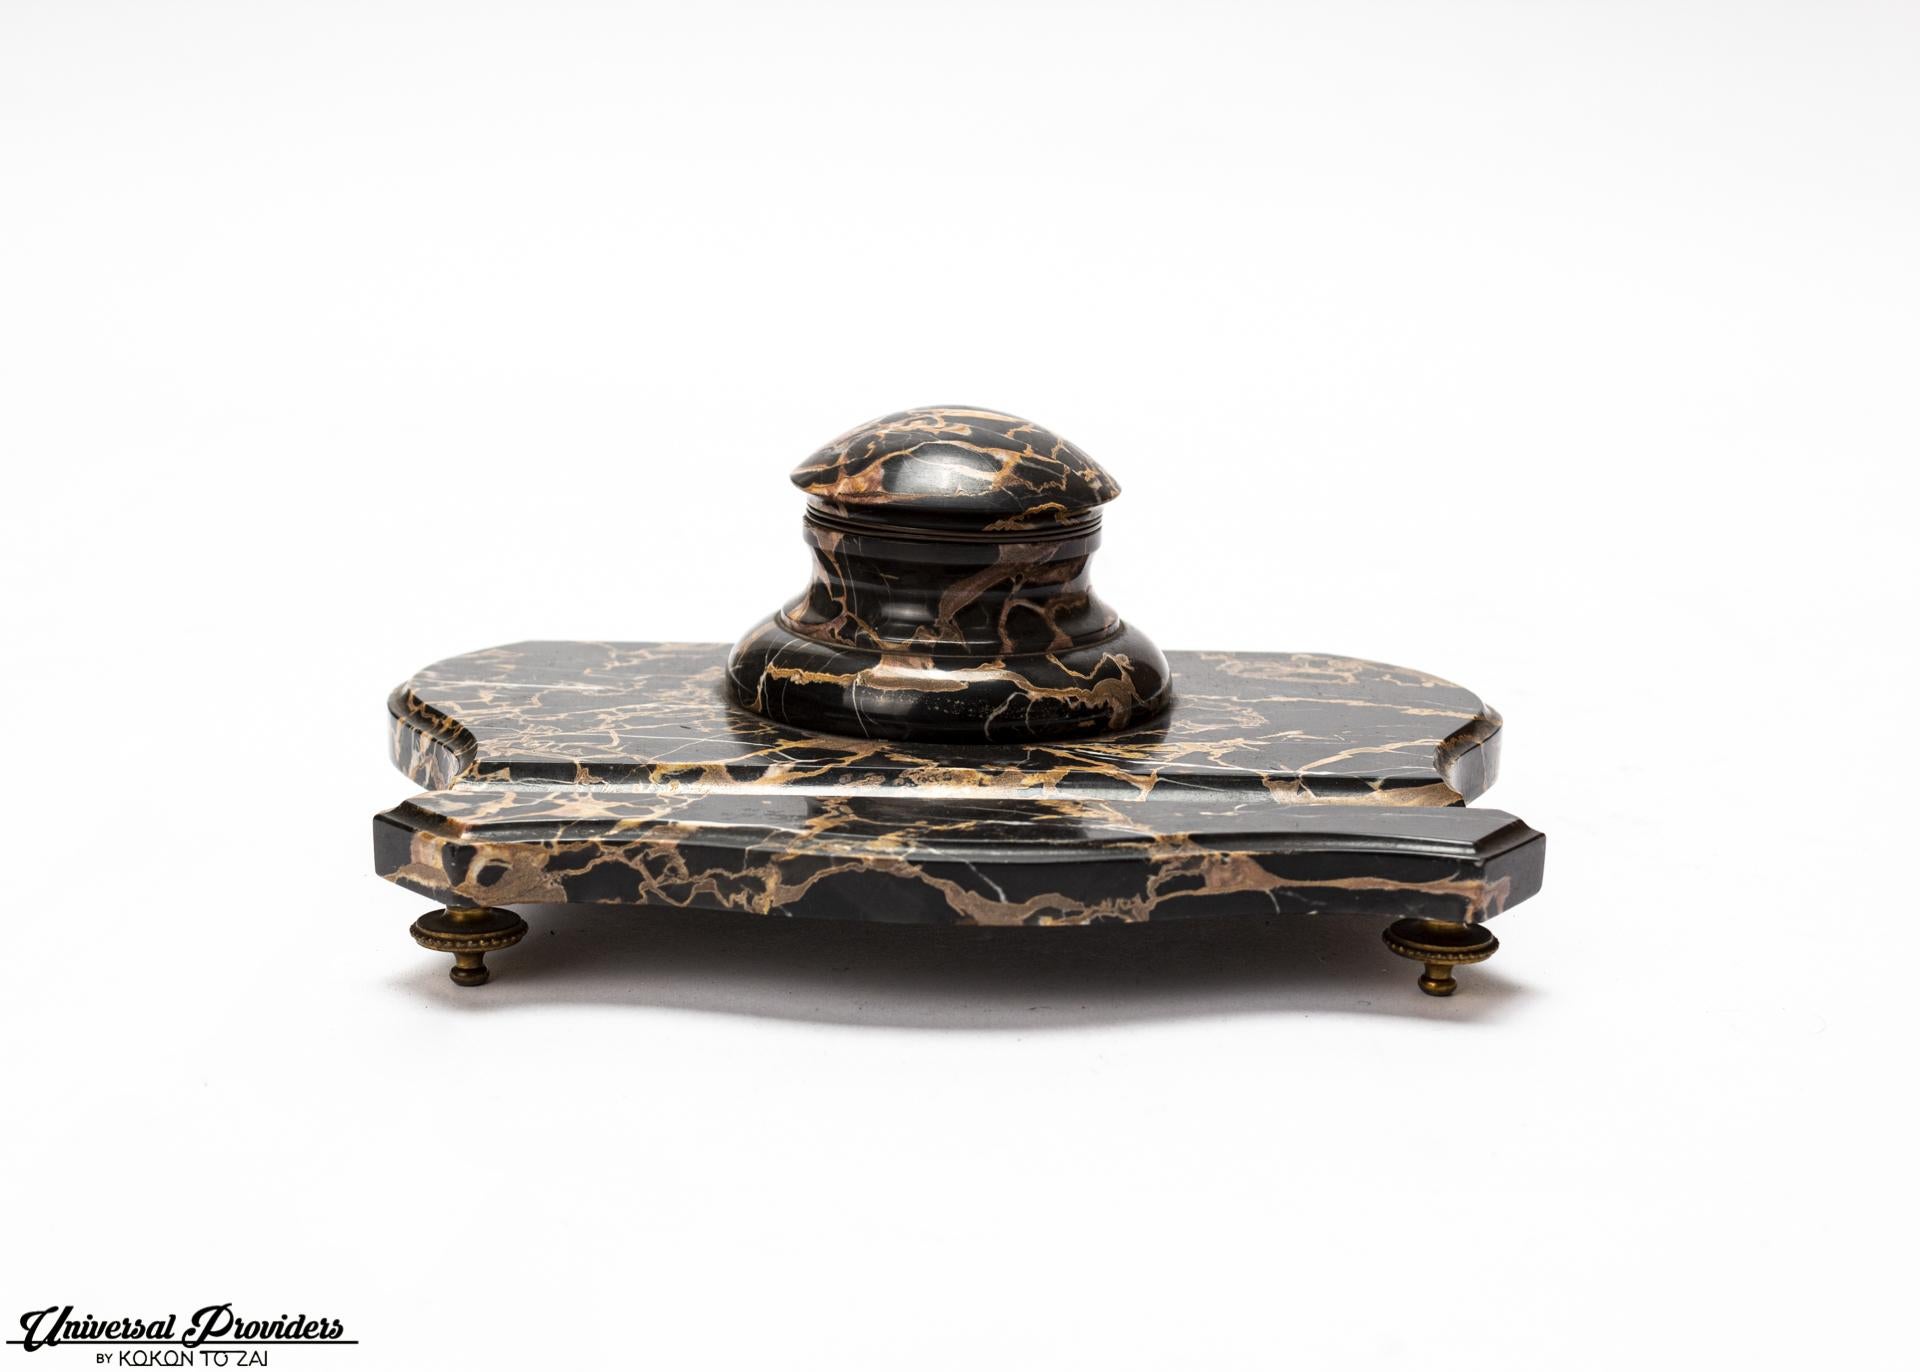 Ornamental French ink-well made of natural marble and bronze, early 19th century.